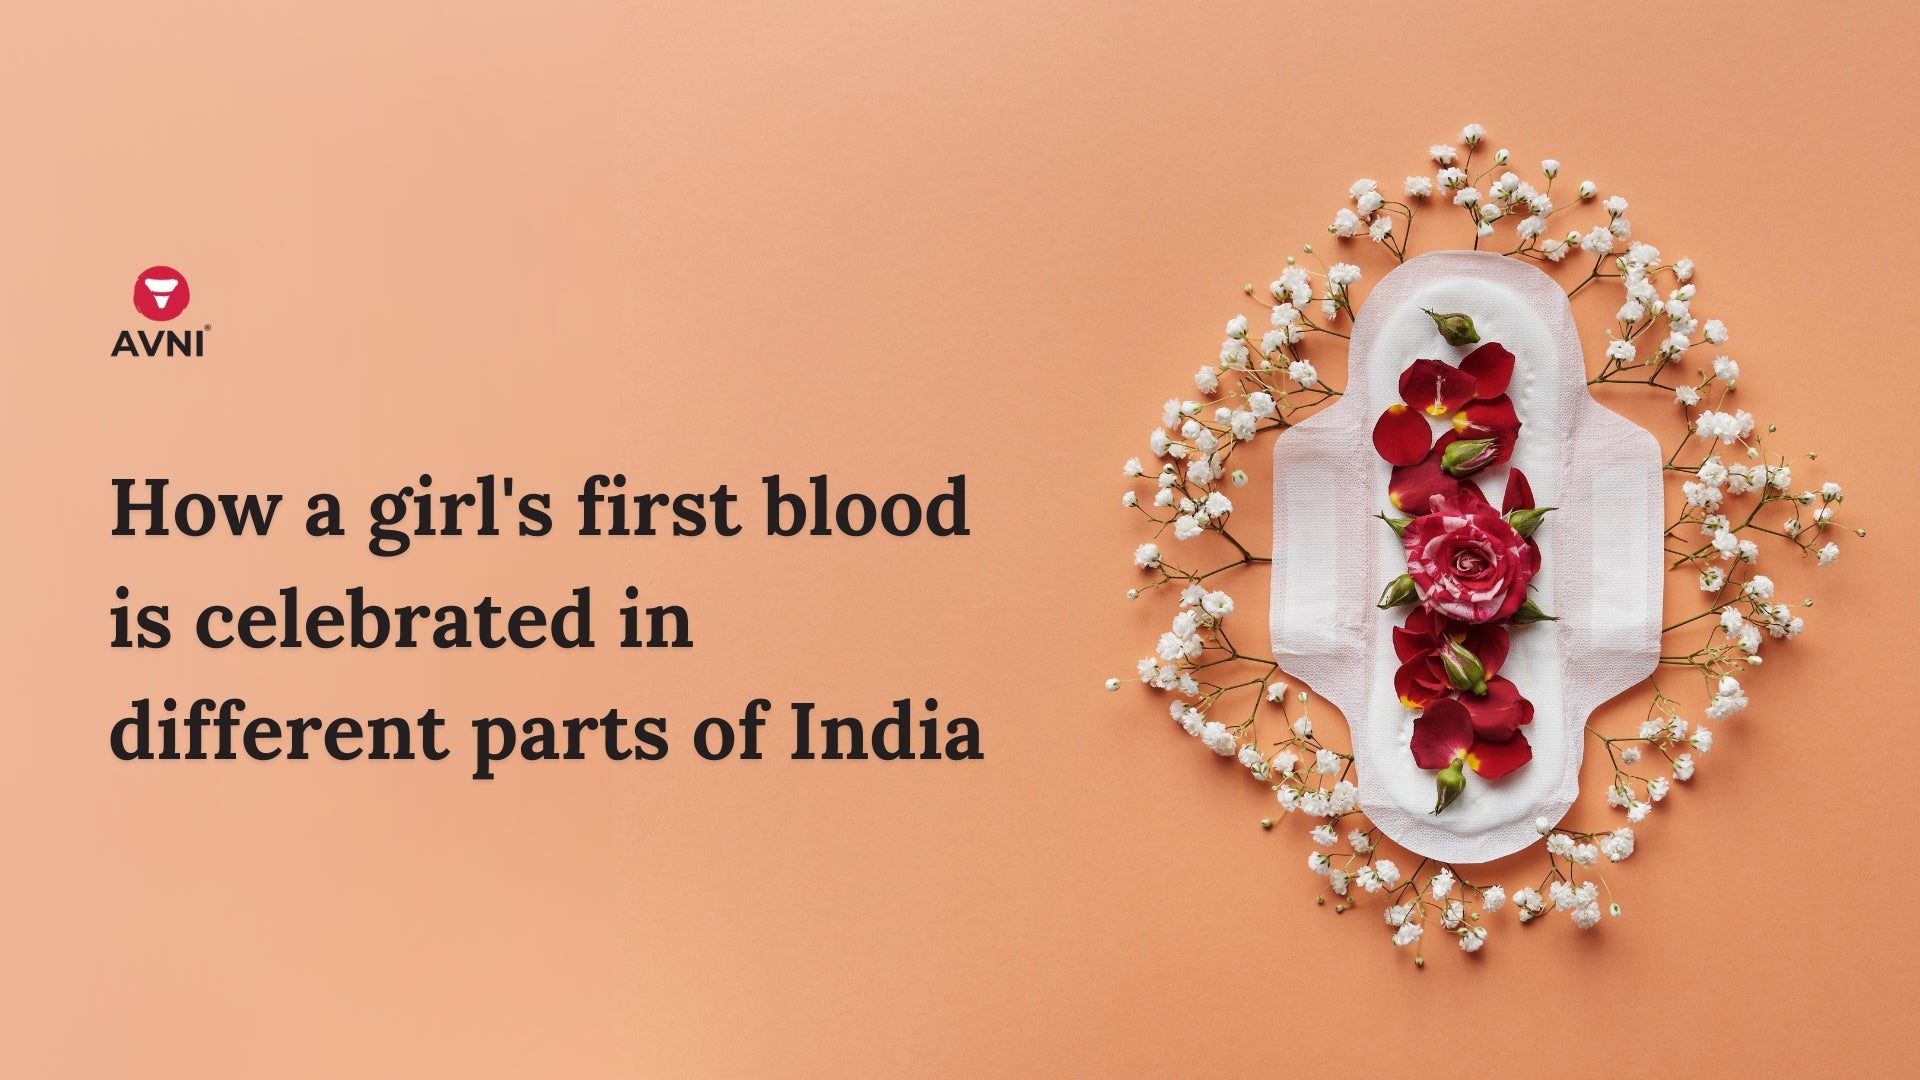 How a girl's first blood is celebrated in different parts of India